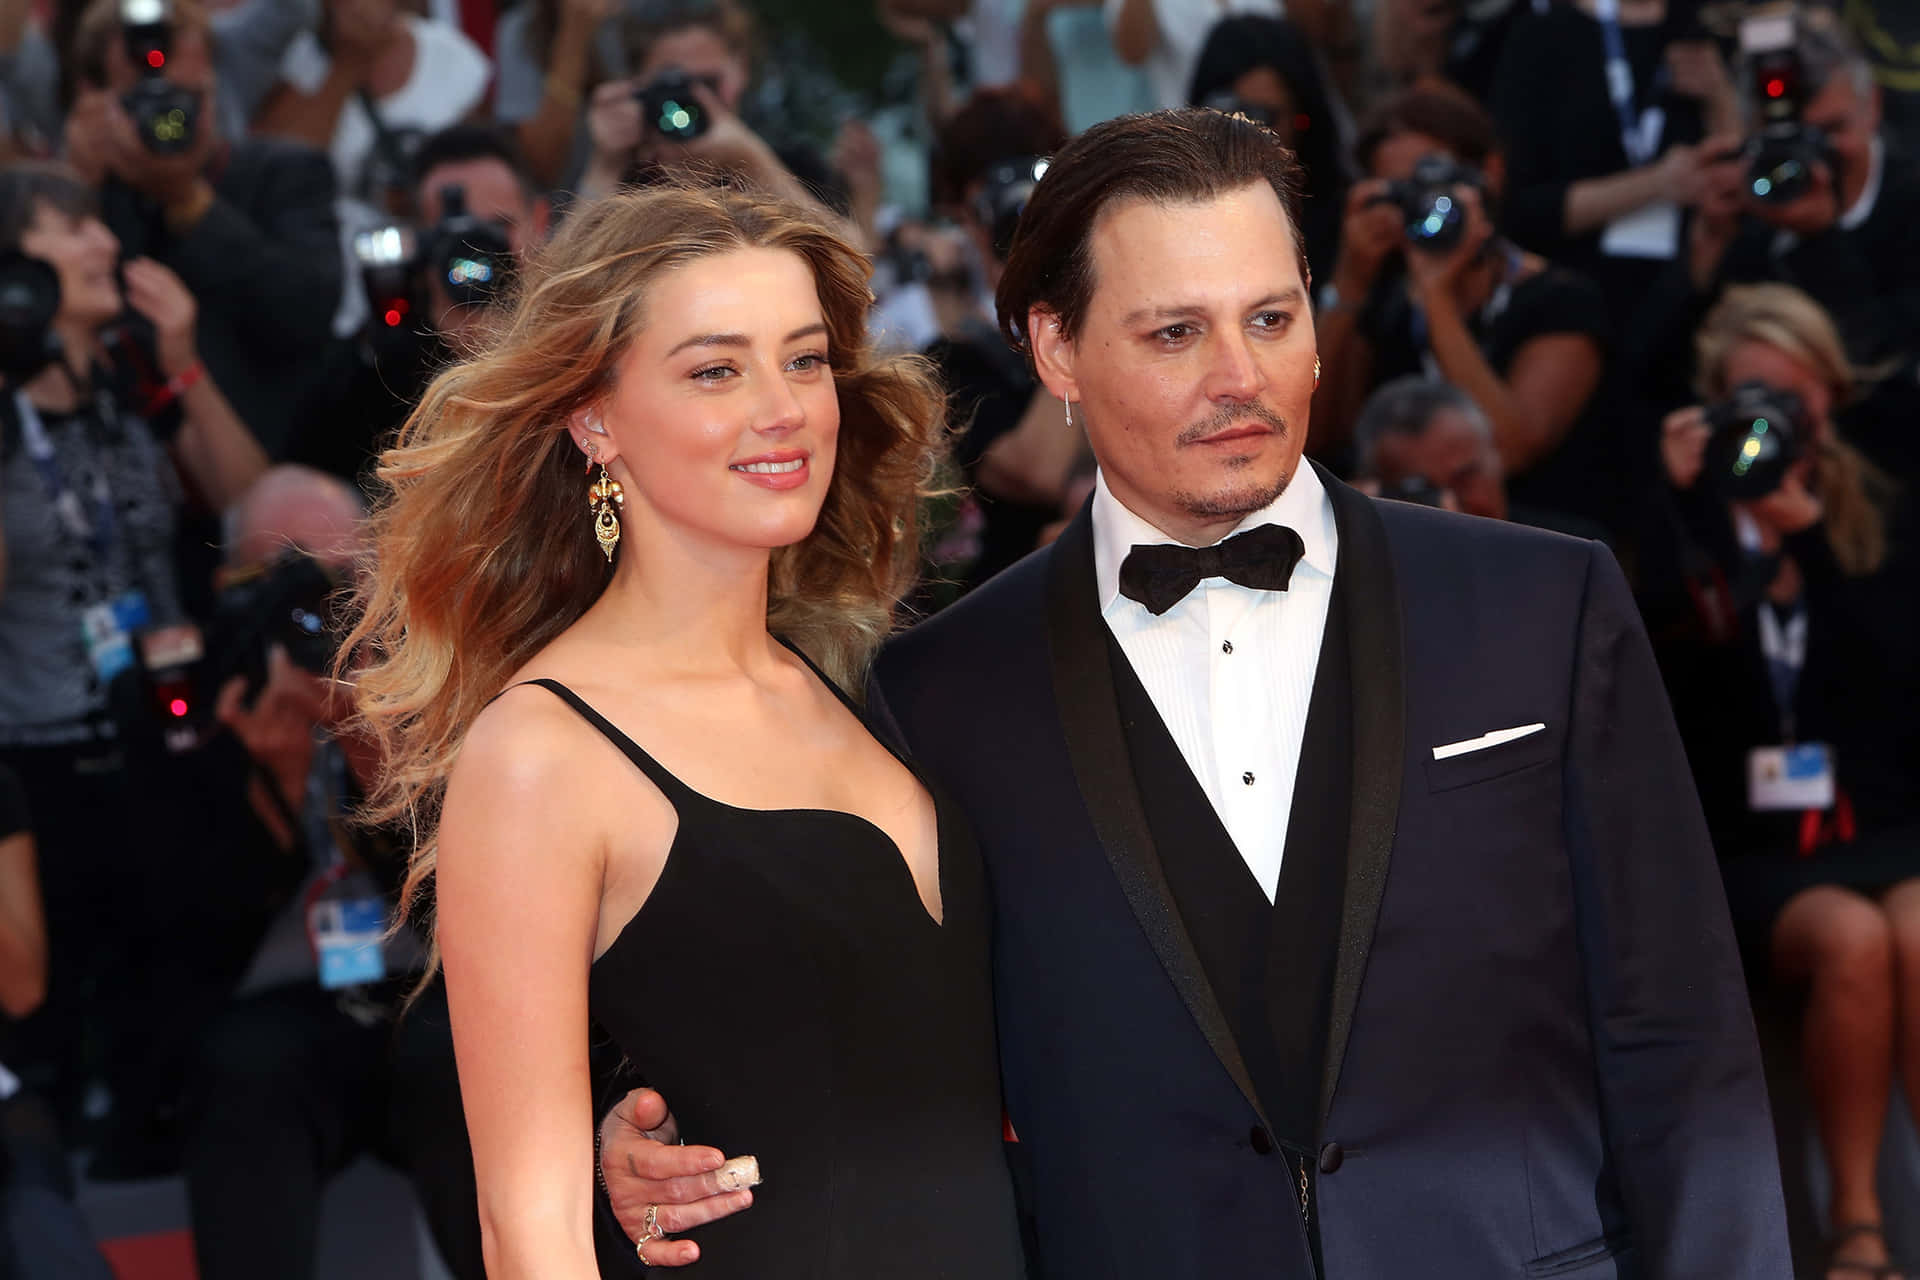 Johnny Depp and Amber Heard Share a Romantic Moment